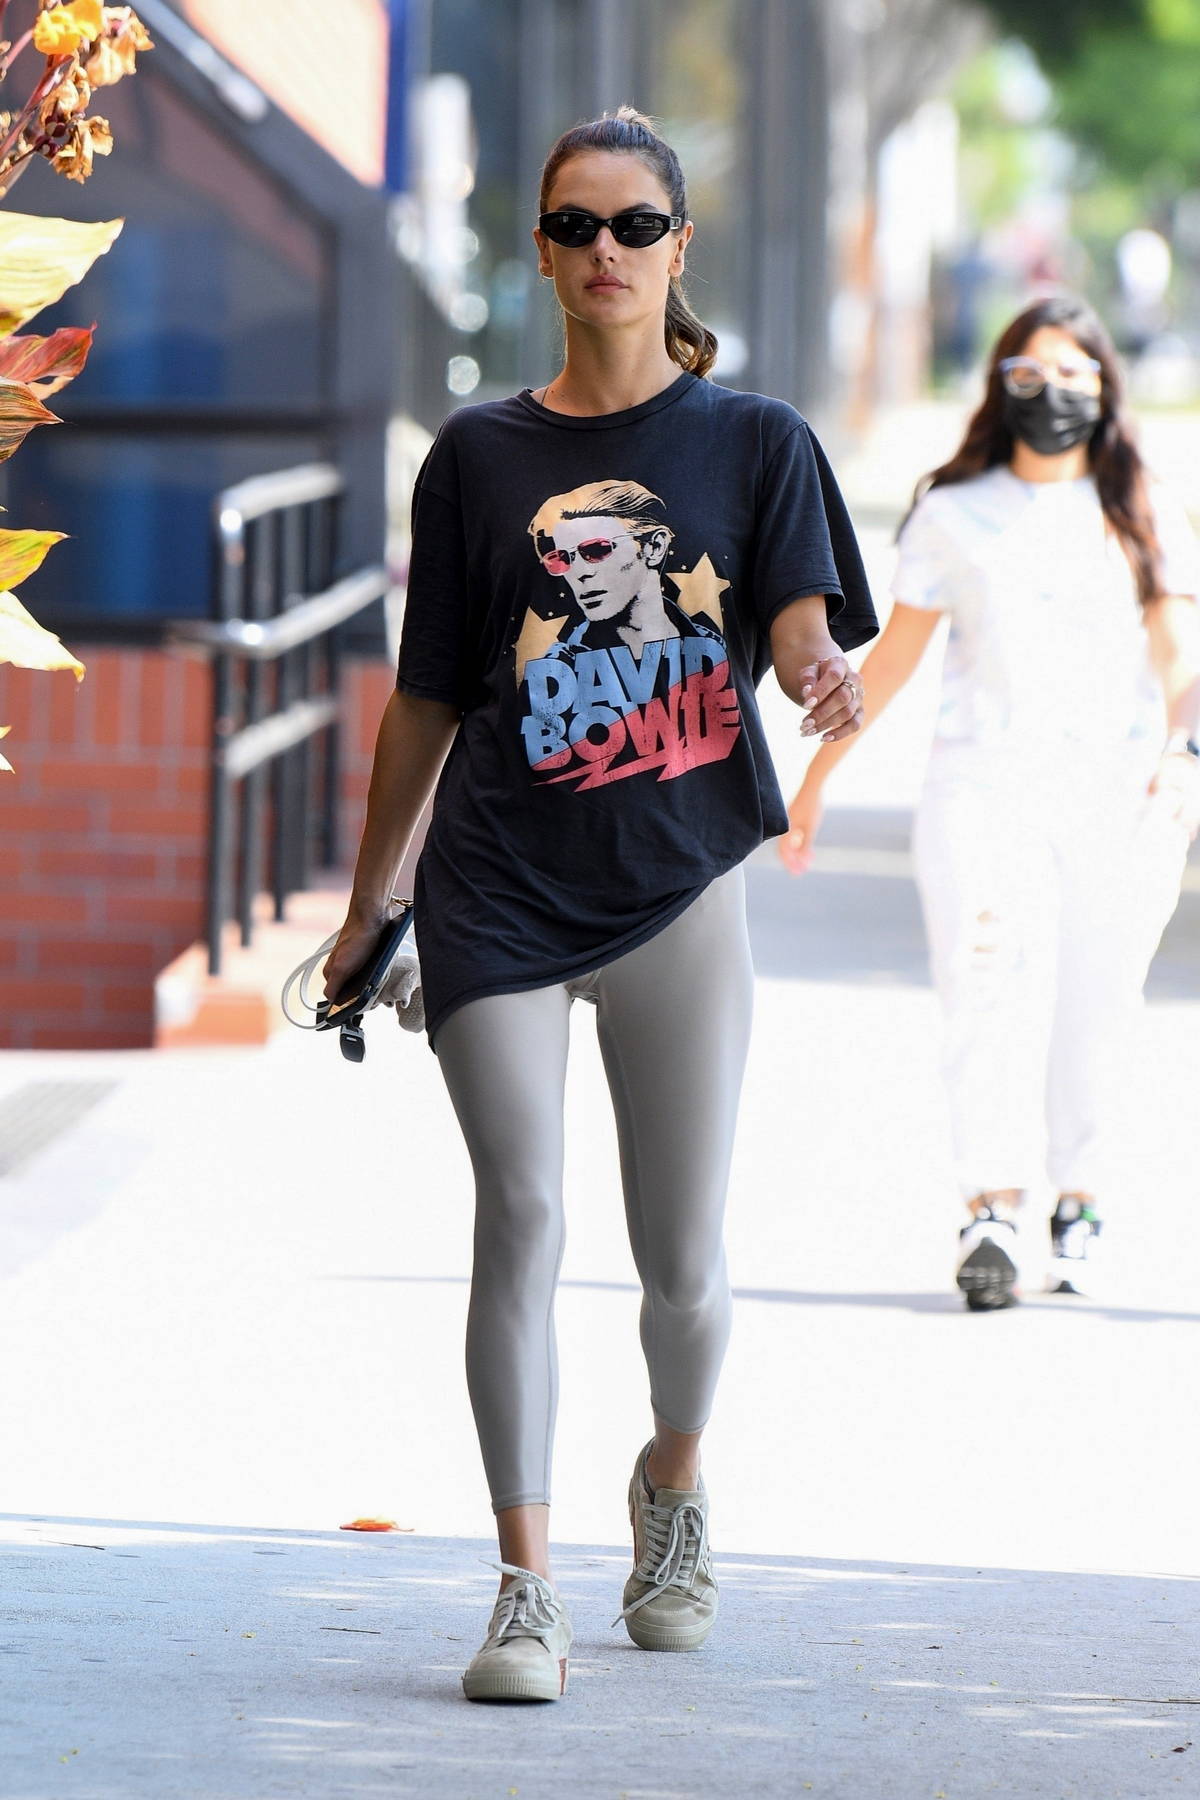 Alessandra Ambrosio rocks a 'David Bowie' tee and grey leggings for a ...